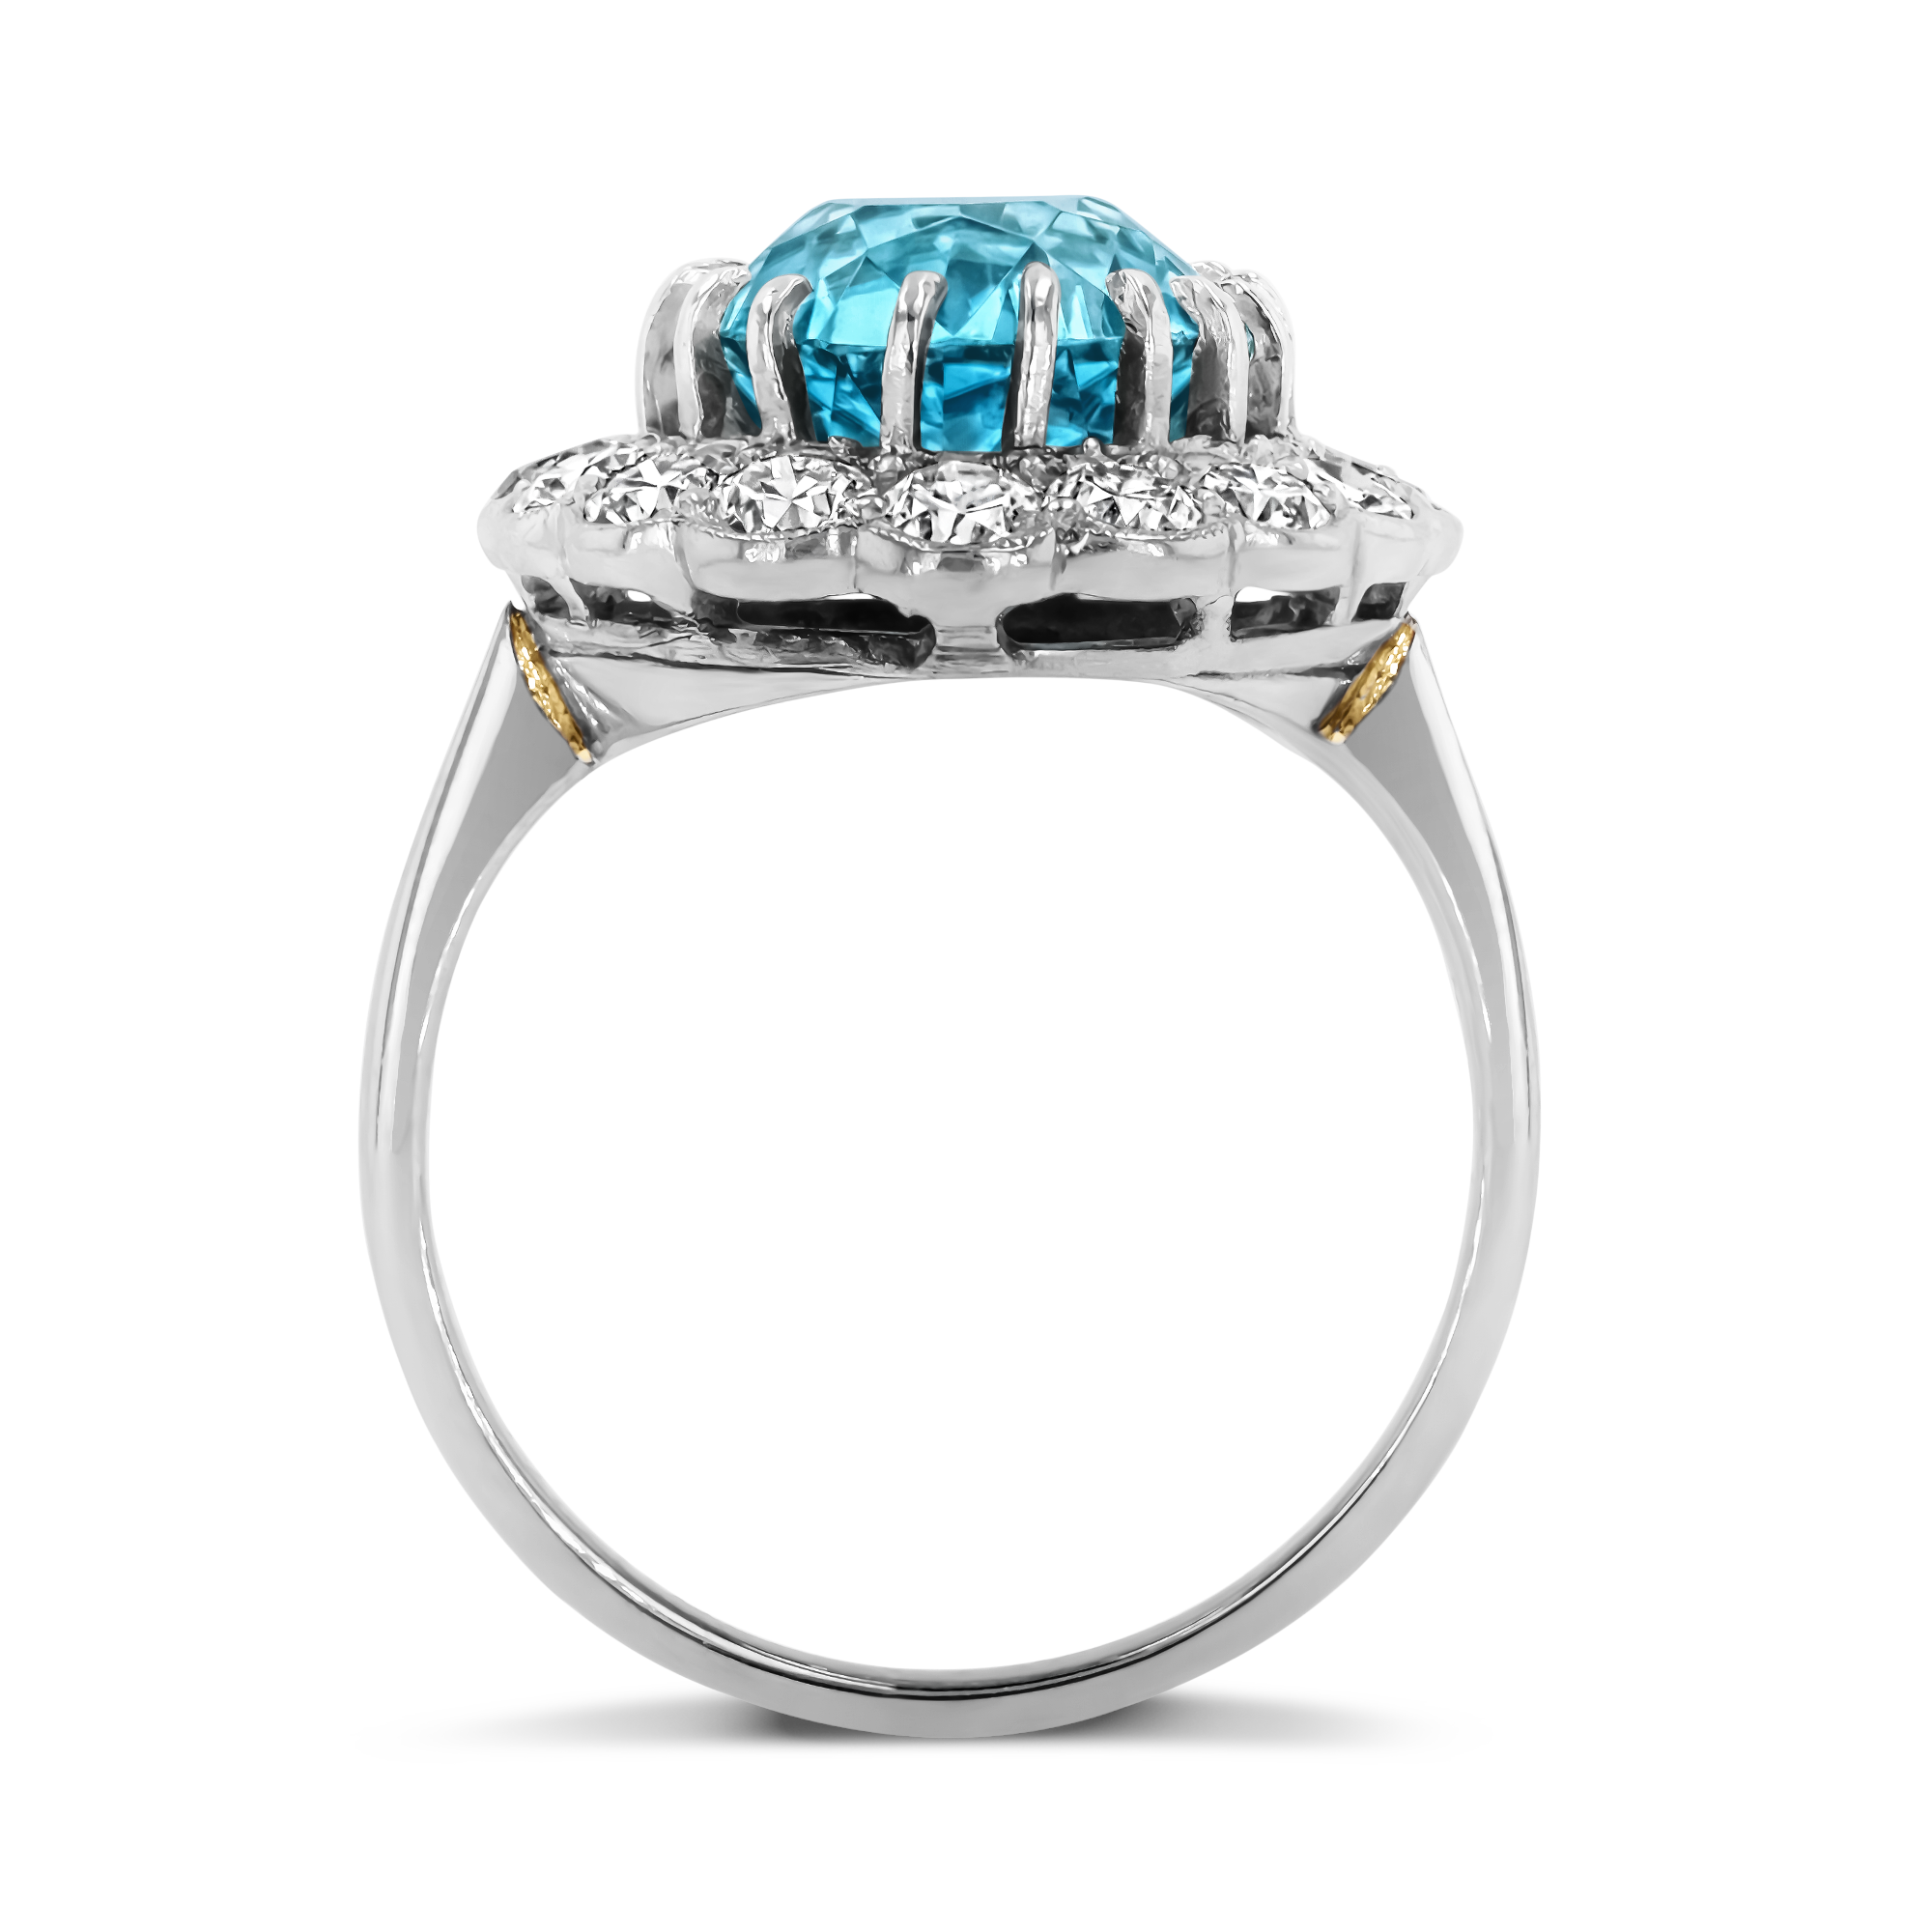 Blue Zircon Cluster Ring with Diamond Surround Oval Cut, Claw Set_3